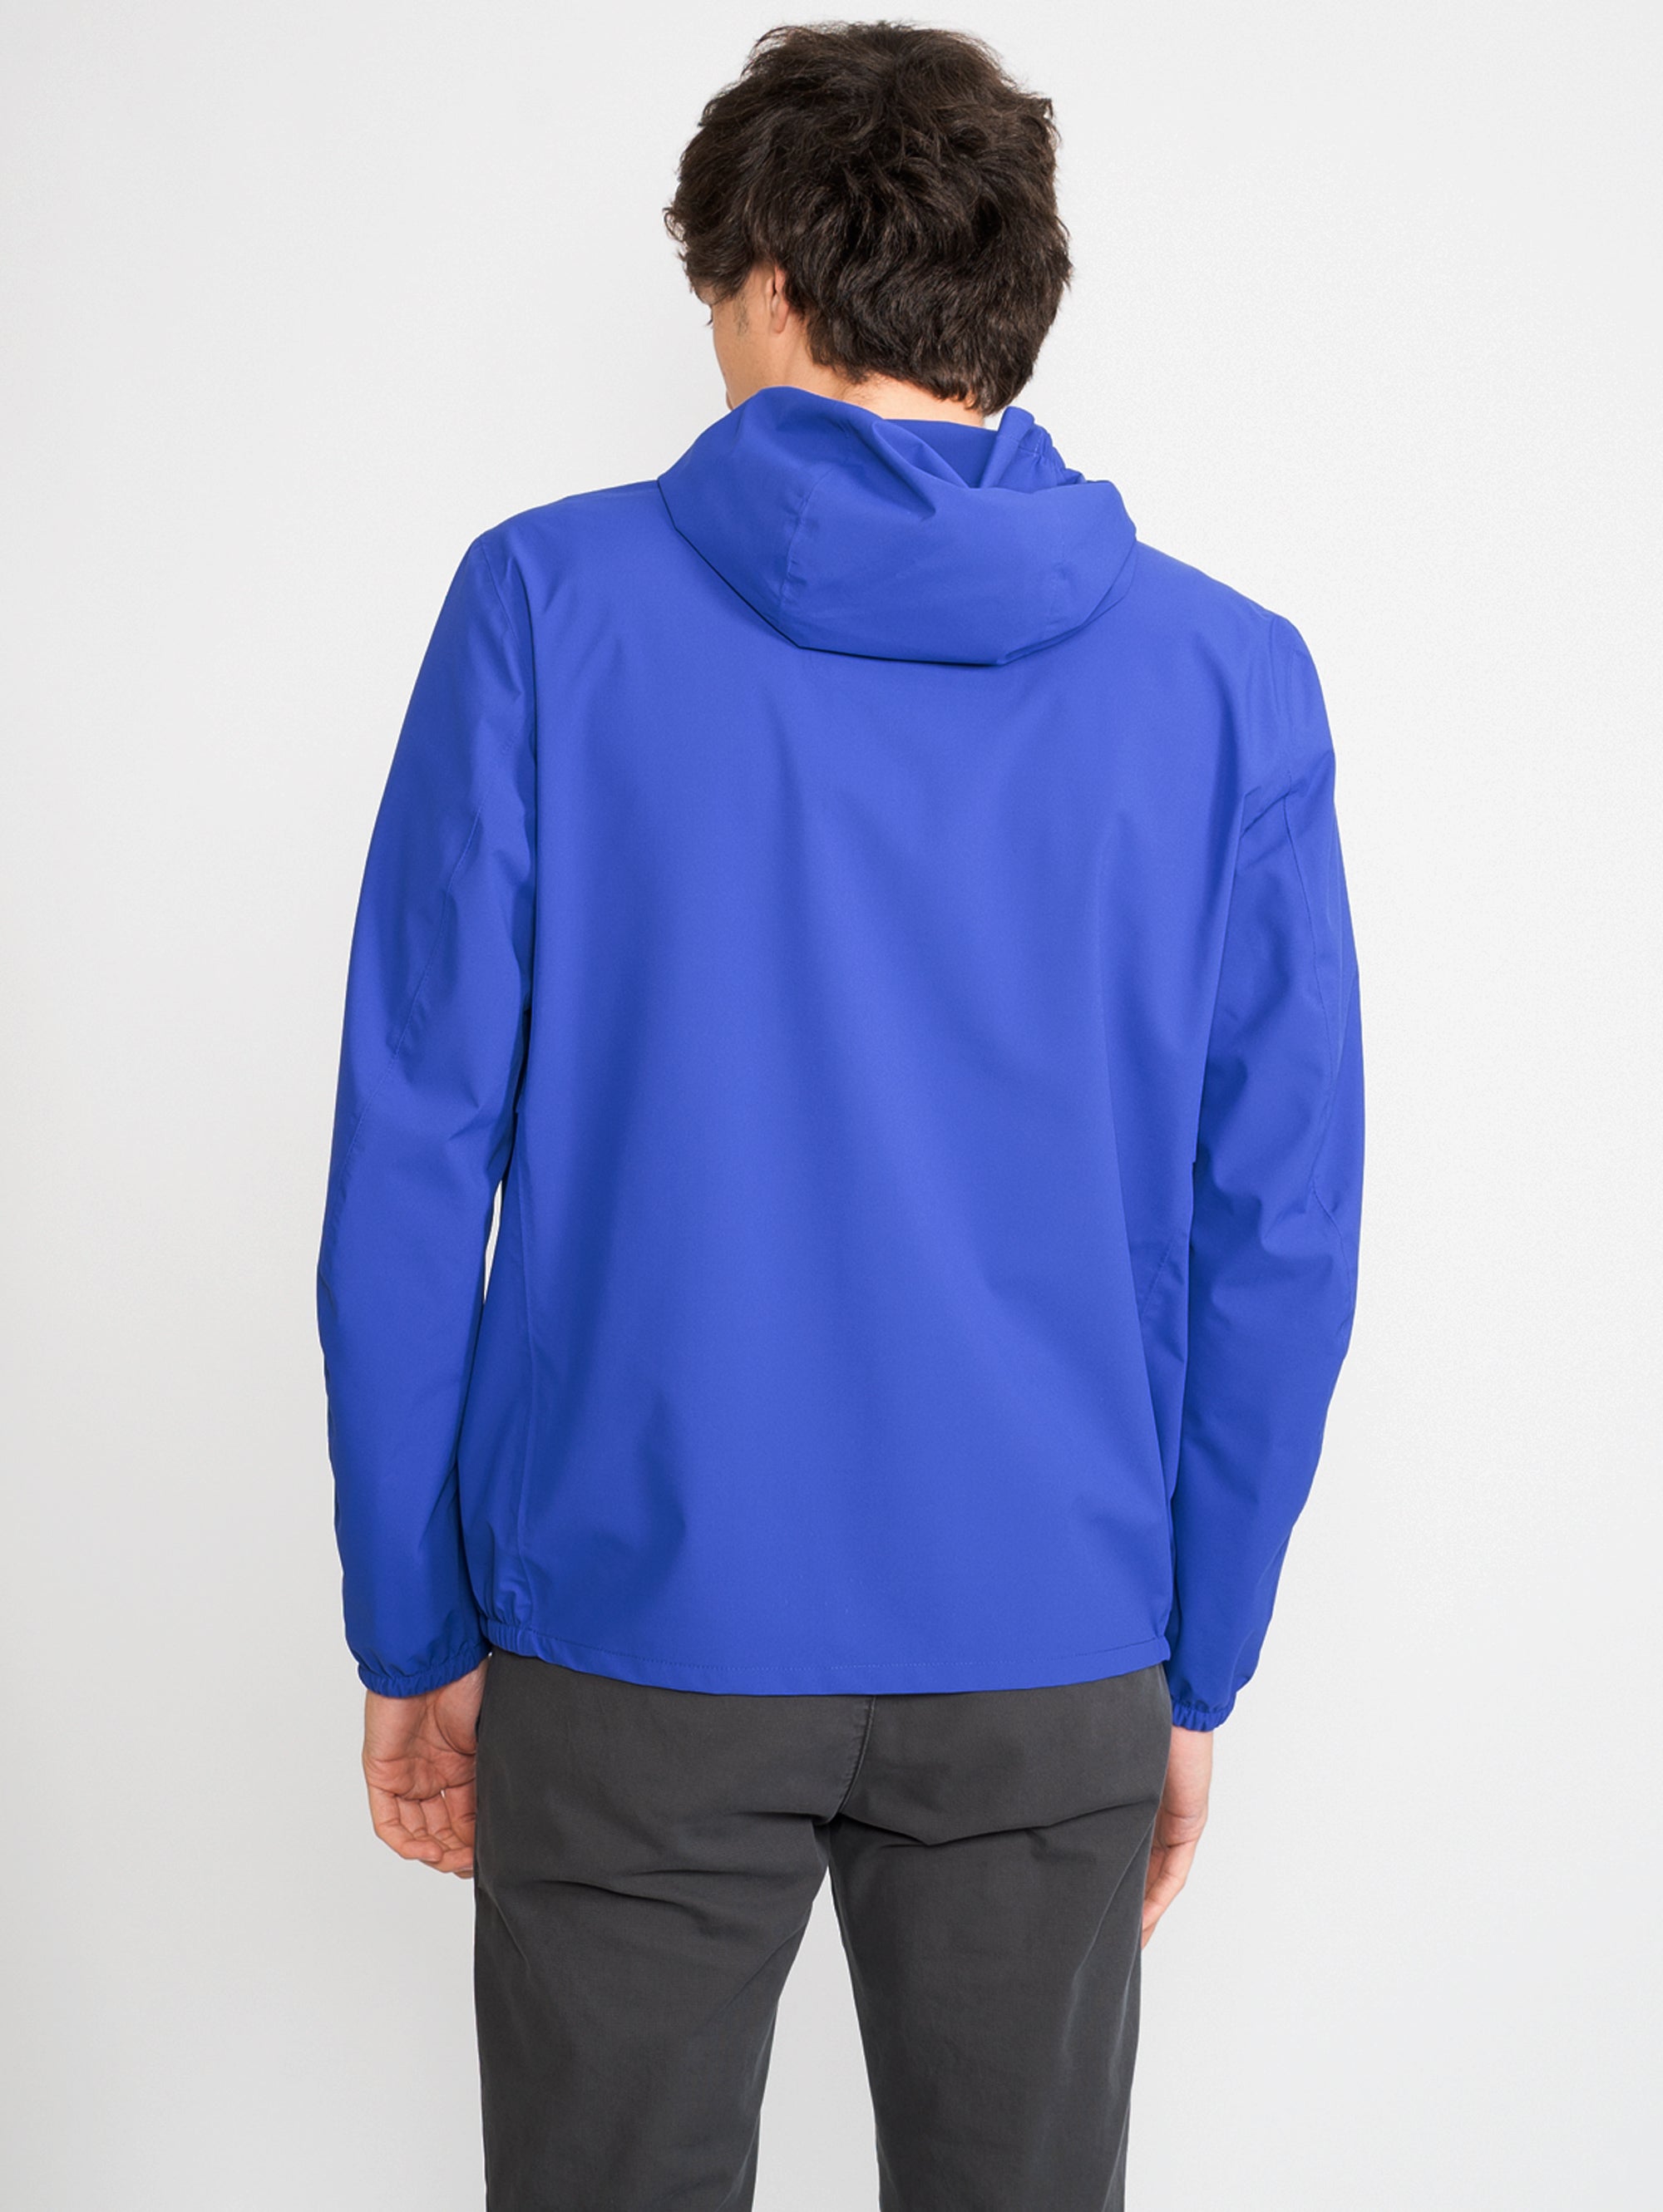 Breathable and Waterproof Blue Jacket